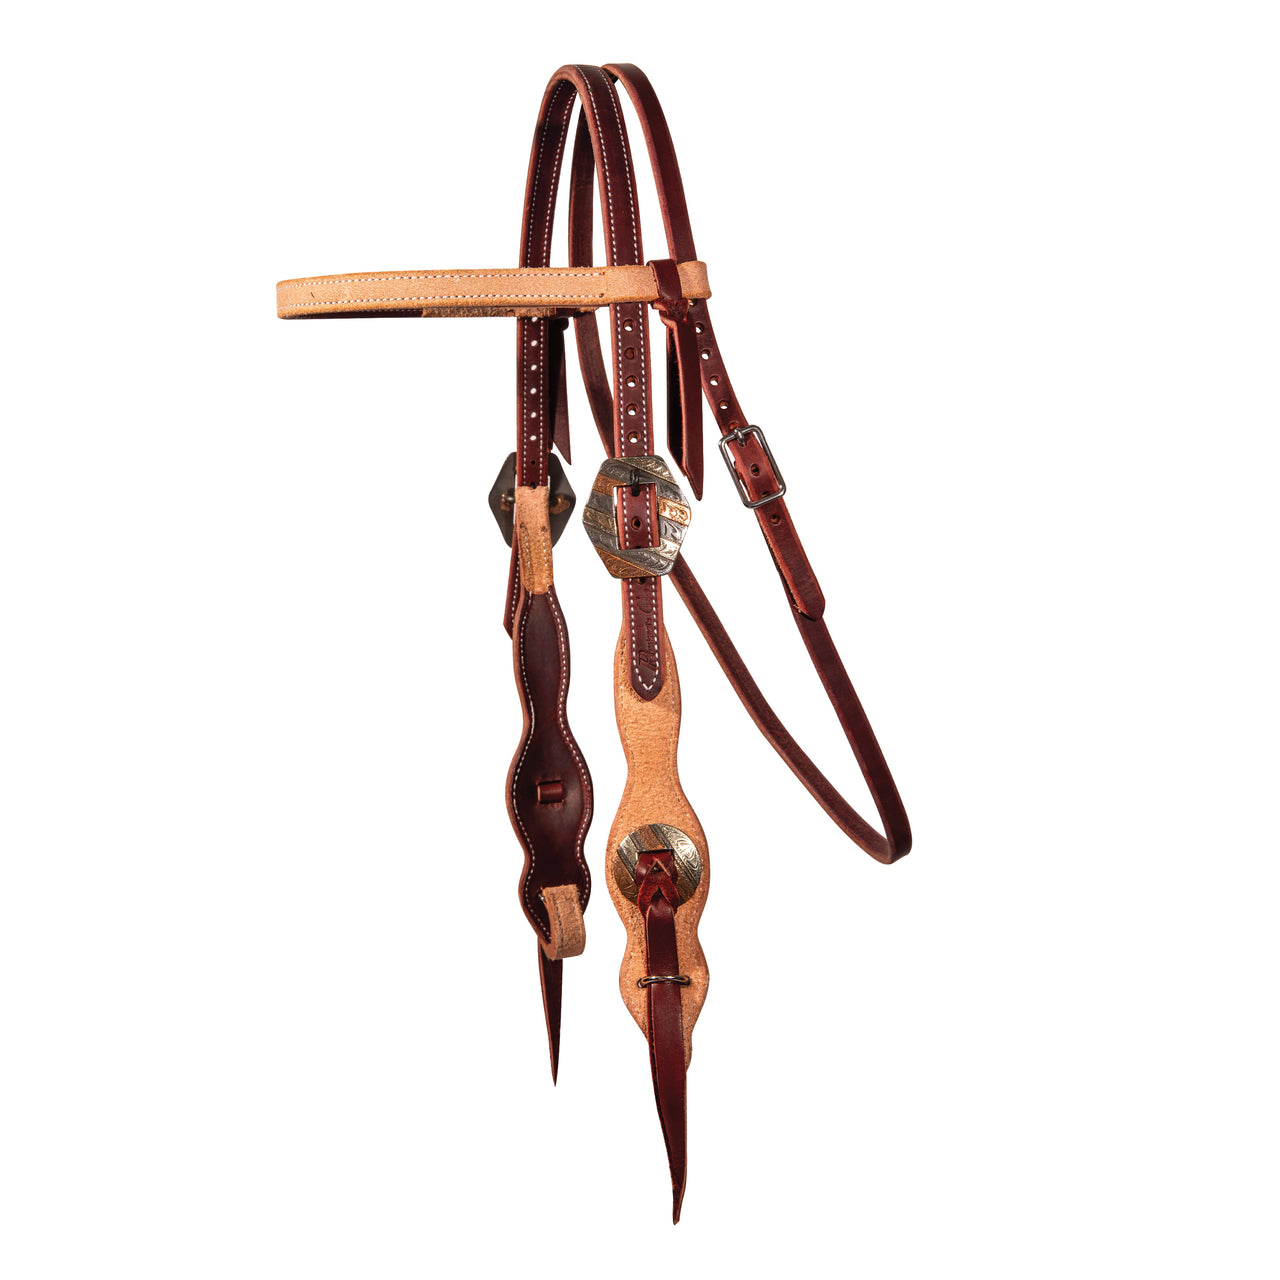 Professional's Choice Browband Quick Change Tassel Headstall - Two Tone Roughout